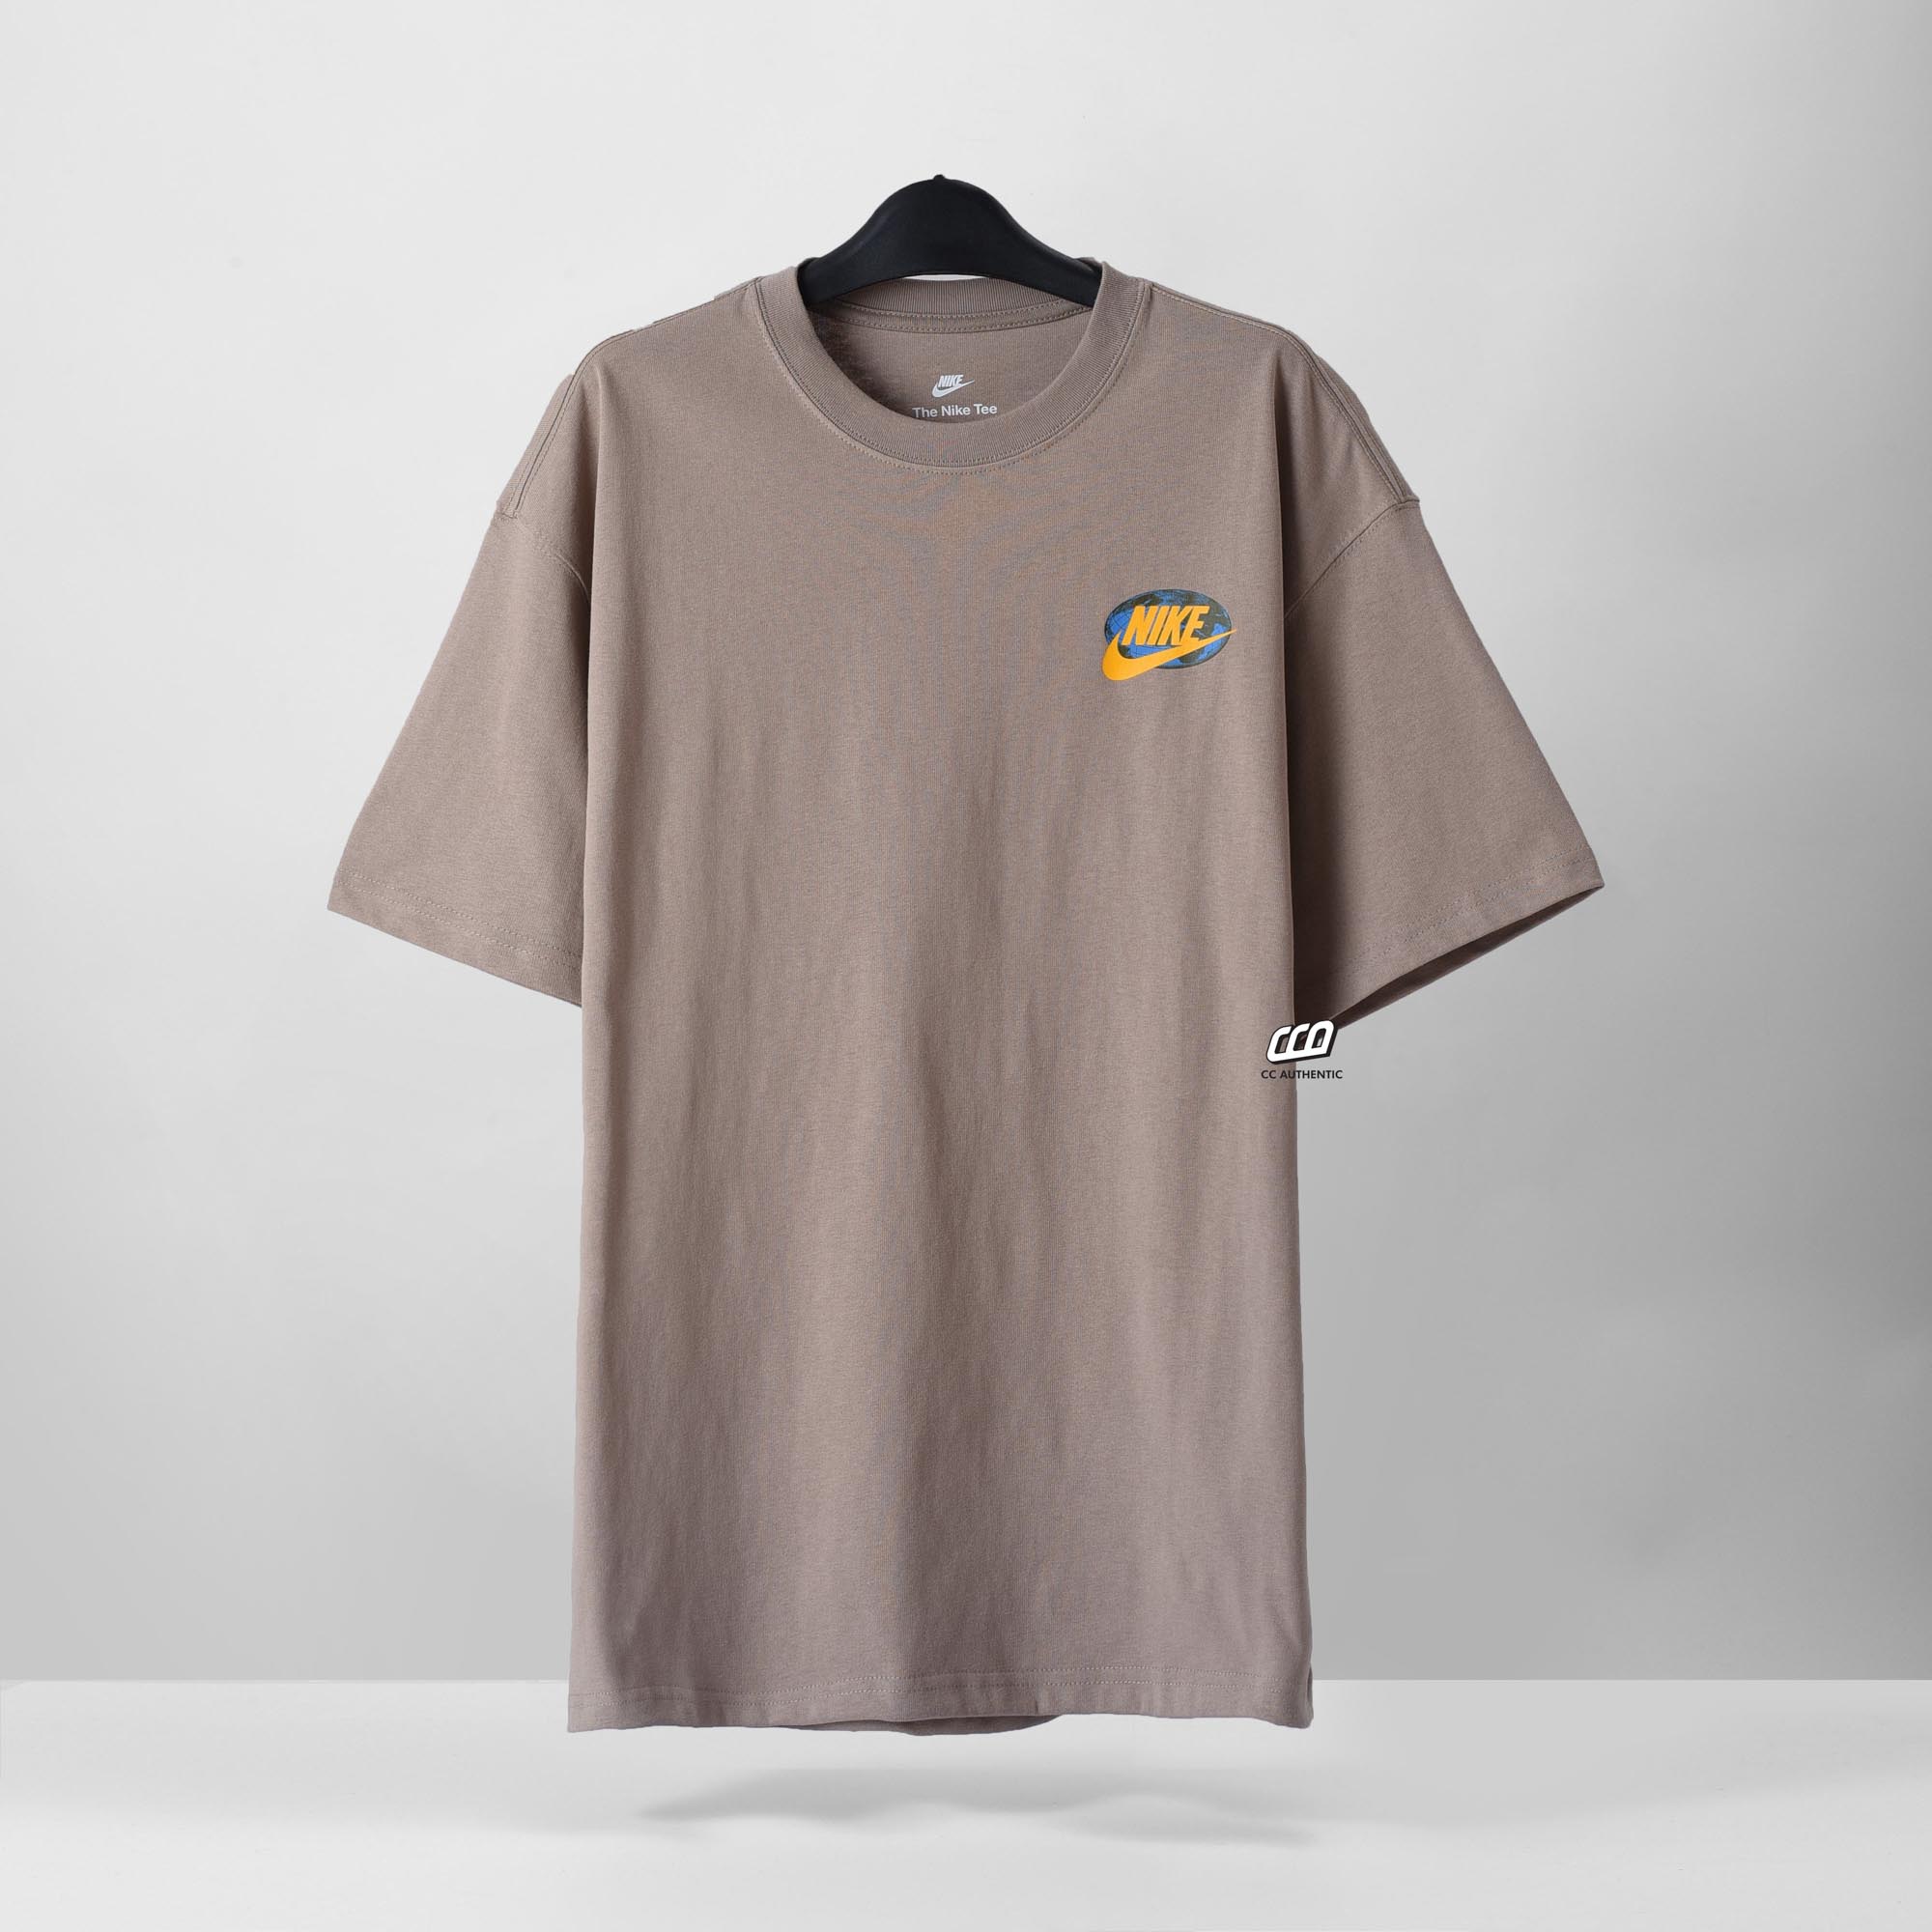 NIKE M90 BRING IT OUT HBR T-SHIRT - BEIGE